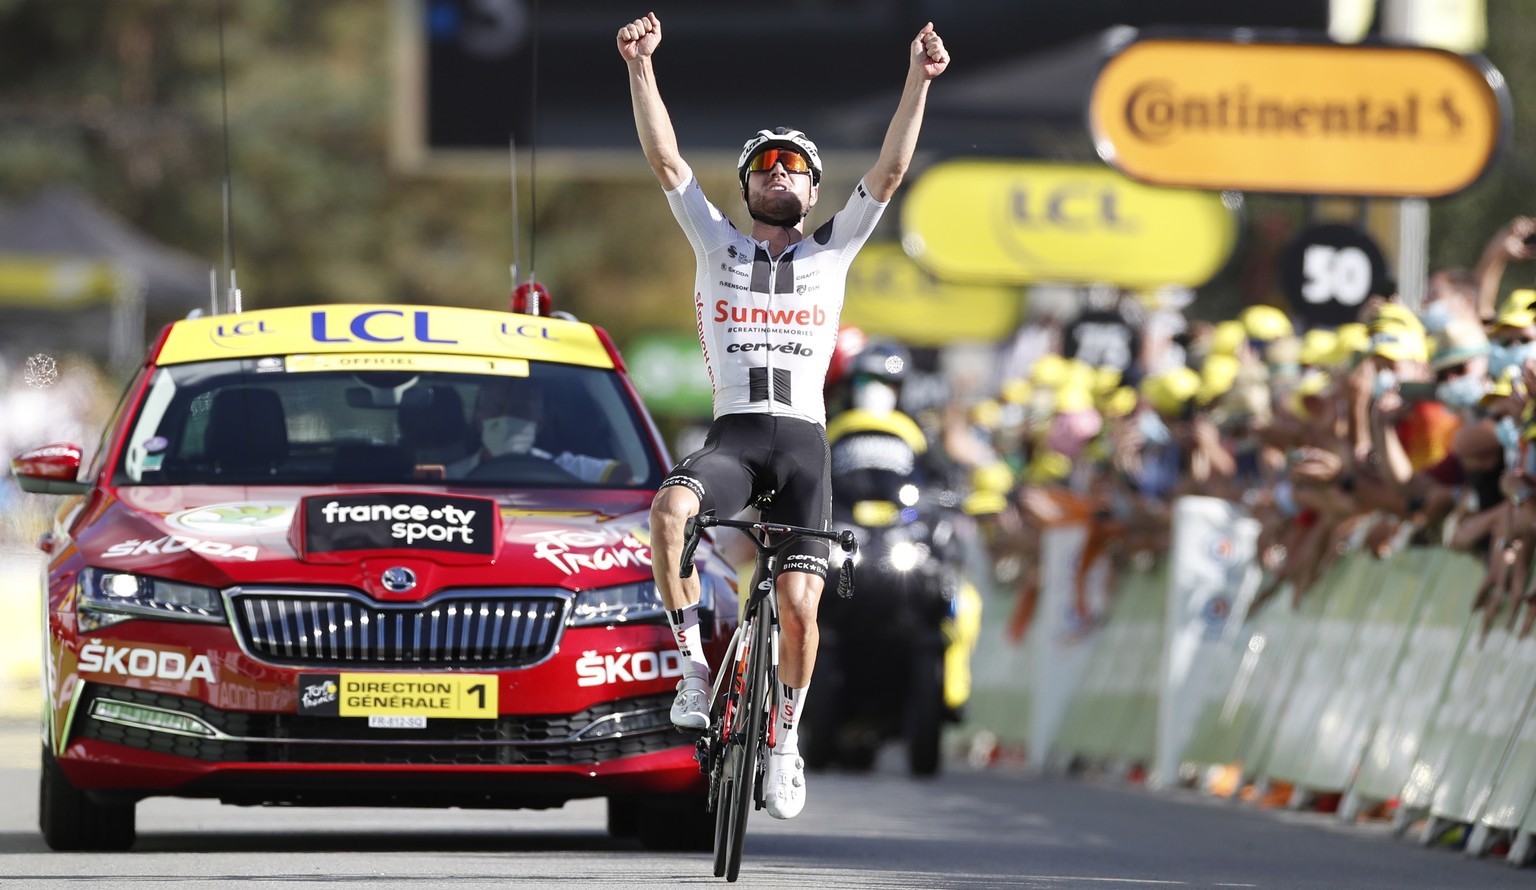 epa08659205 Swiss rider Marc Hirschi of Team Sunweb wins the 12th stage of the Tour de France cycling race over 218km from Chauvigny to Sarran, France, 10 September 2020. EPA/Sebastien Nogier / POOL